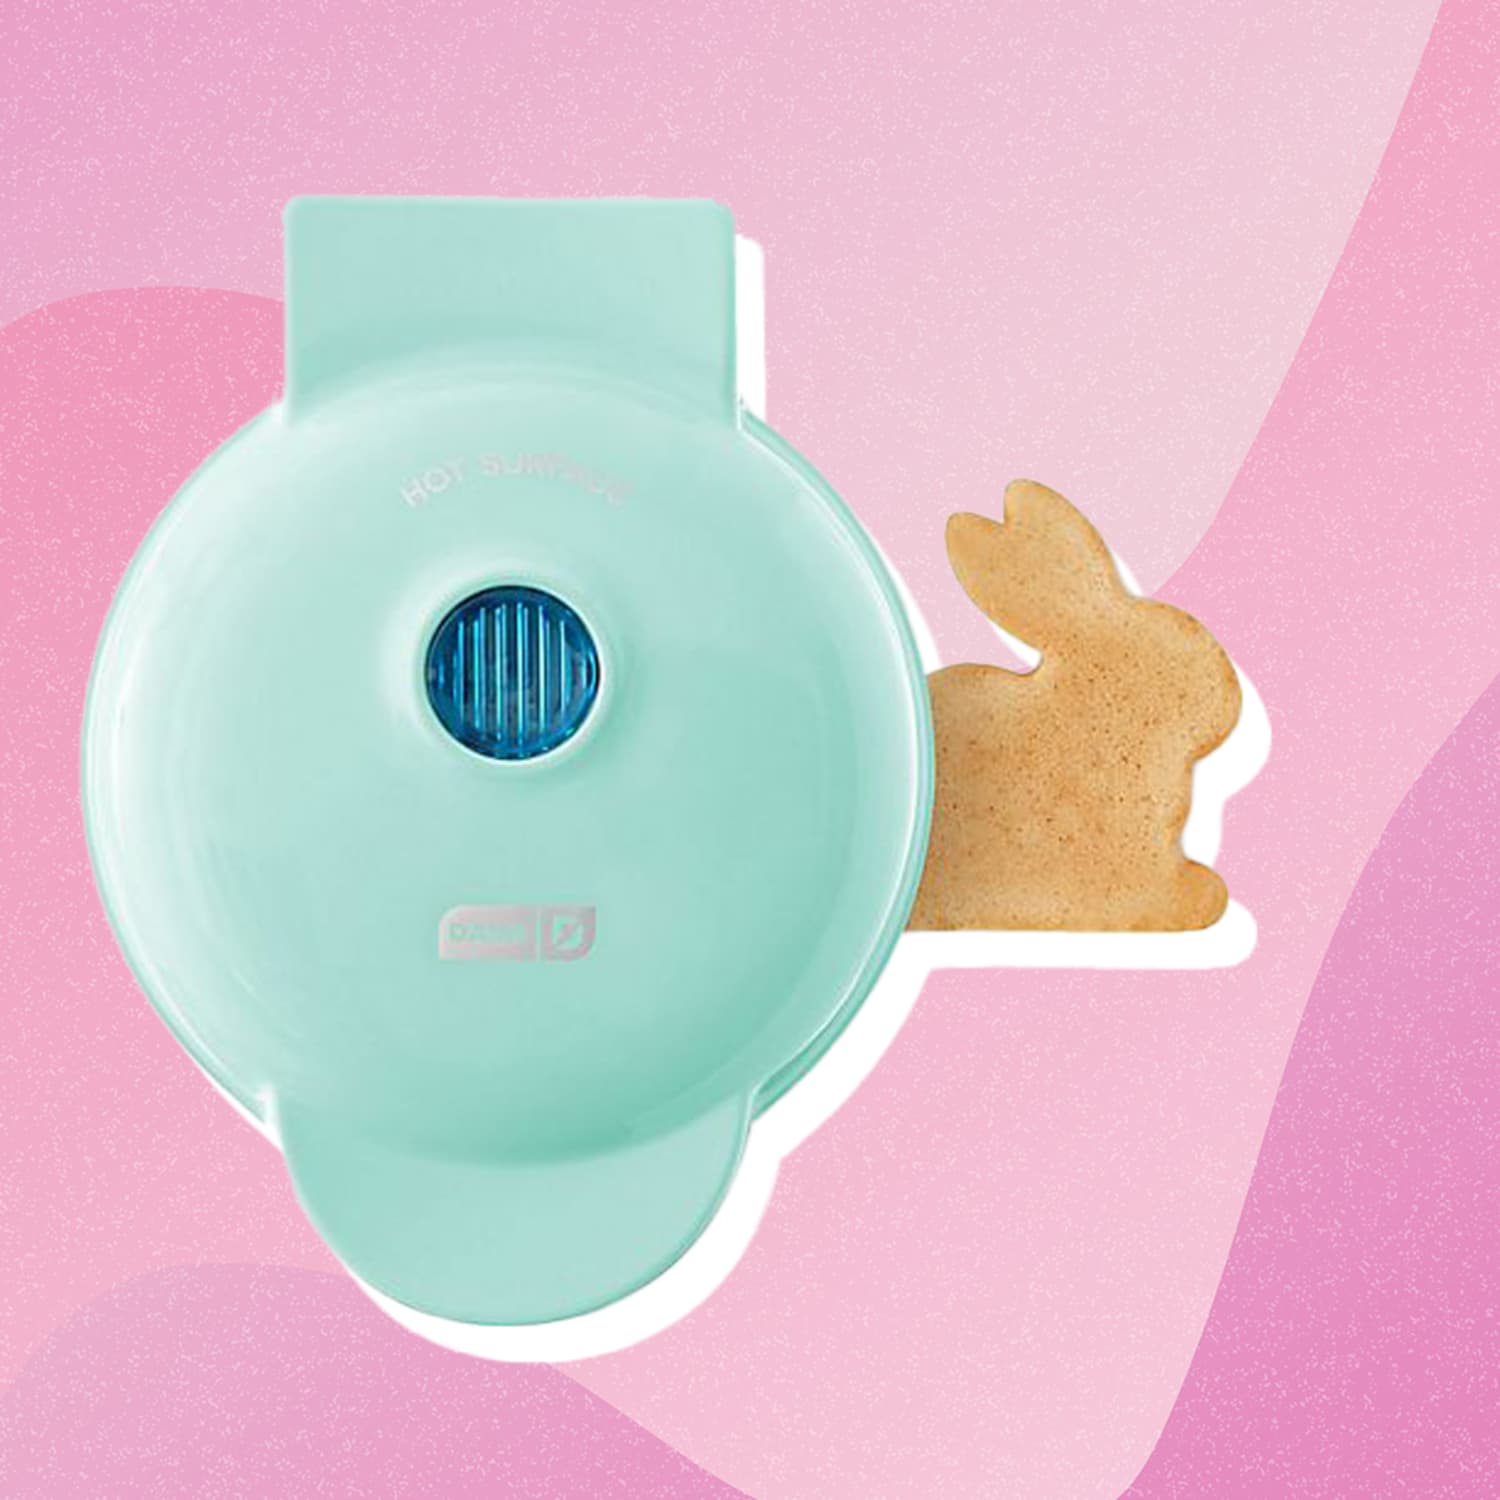 Target Is Selling a New Dash Mini Waffle Maker With an Adorable Flower  Design